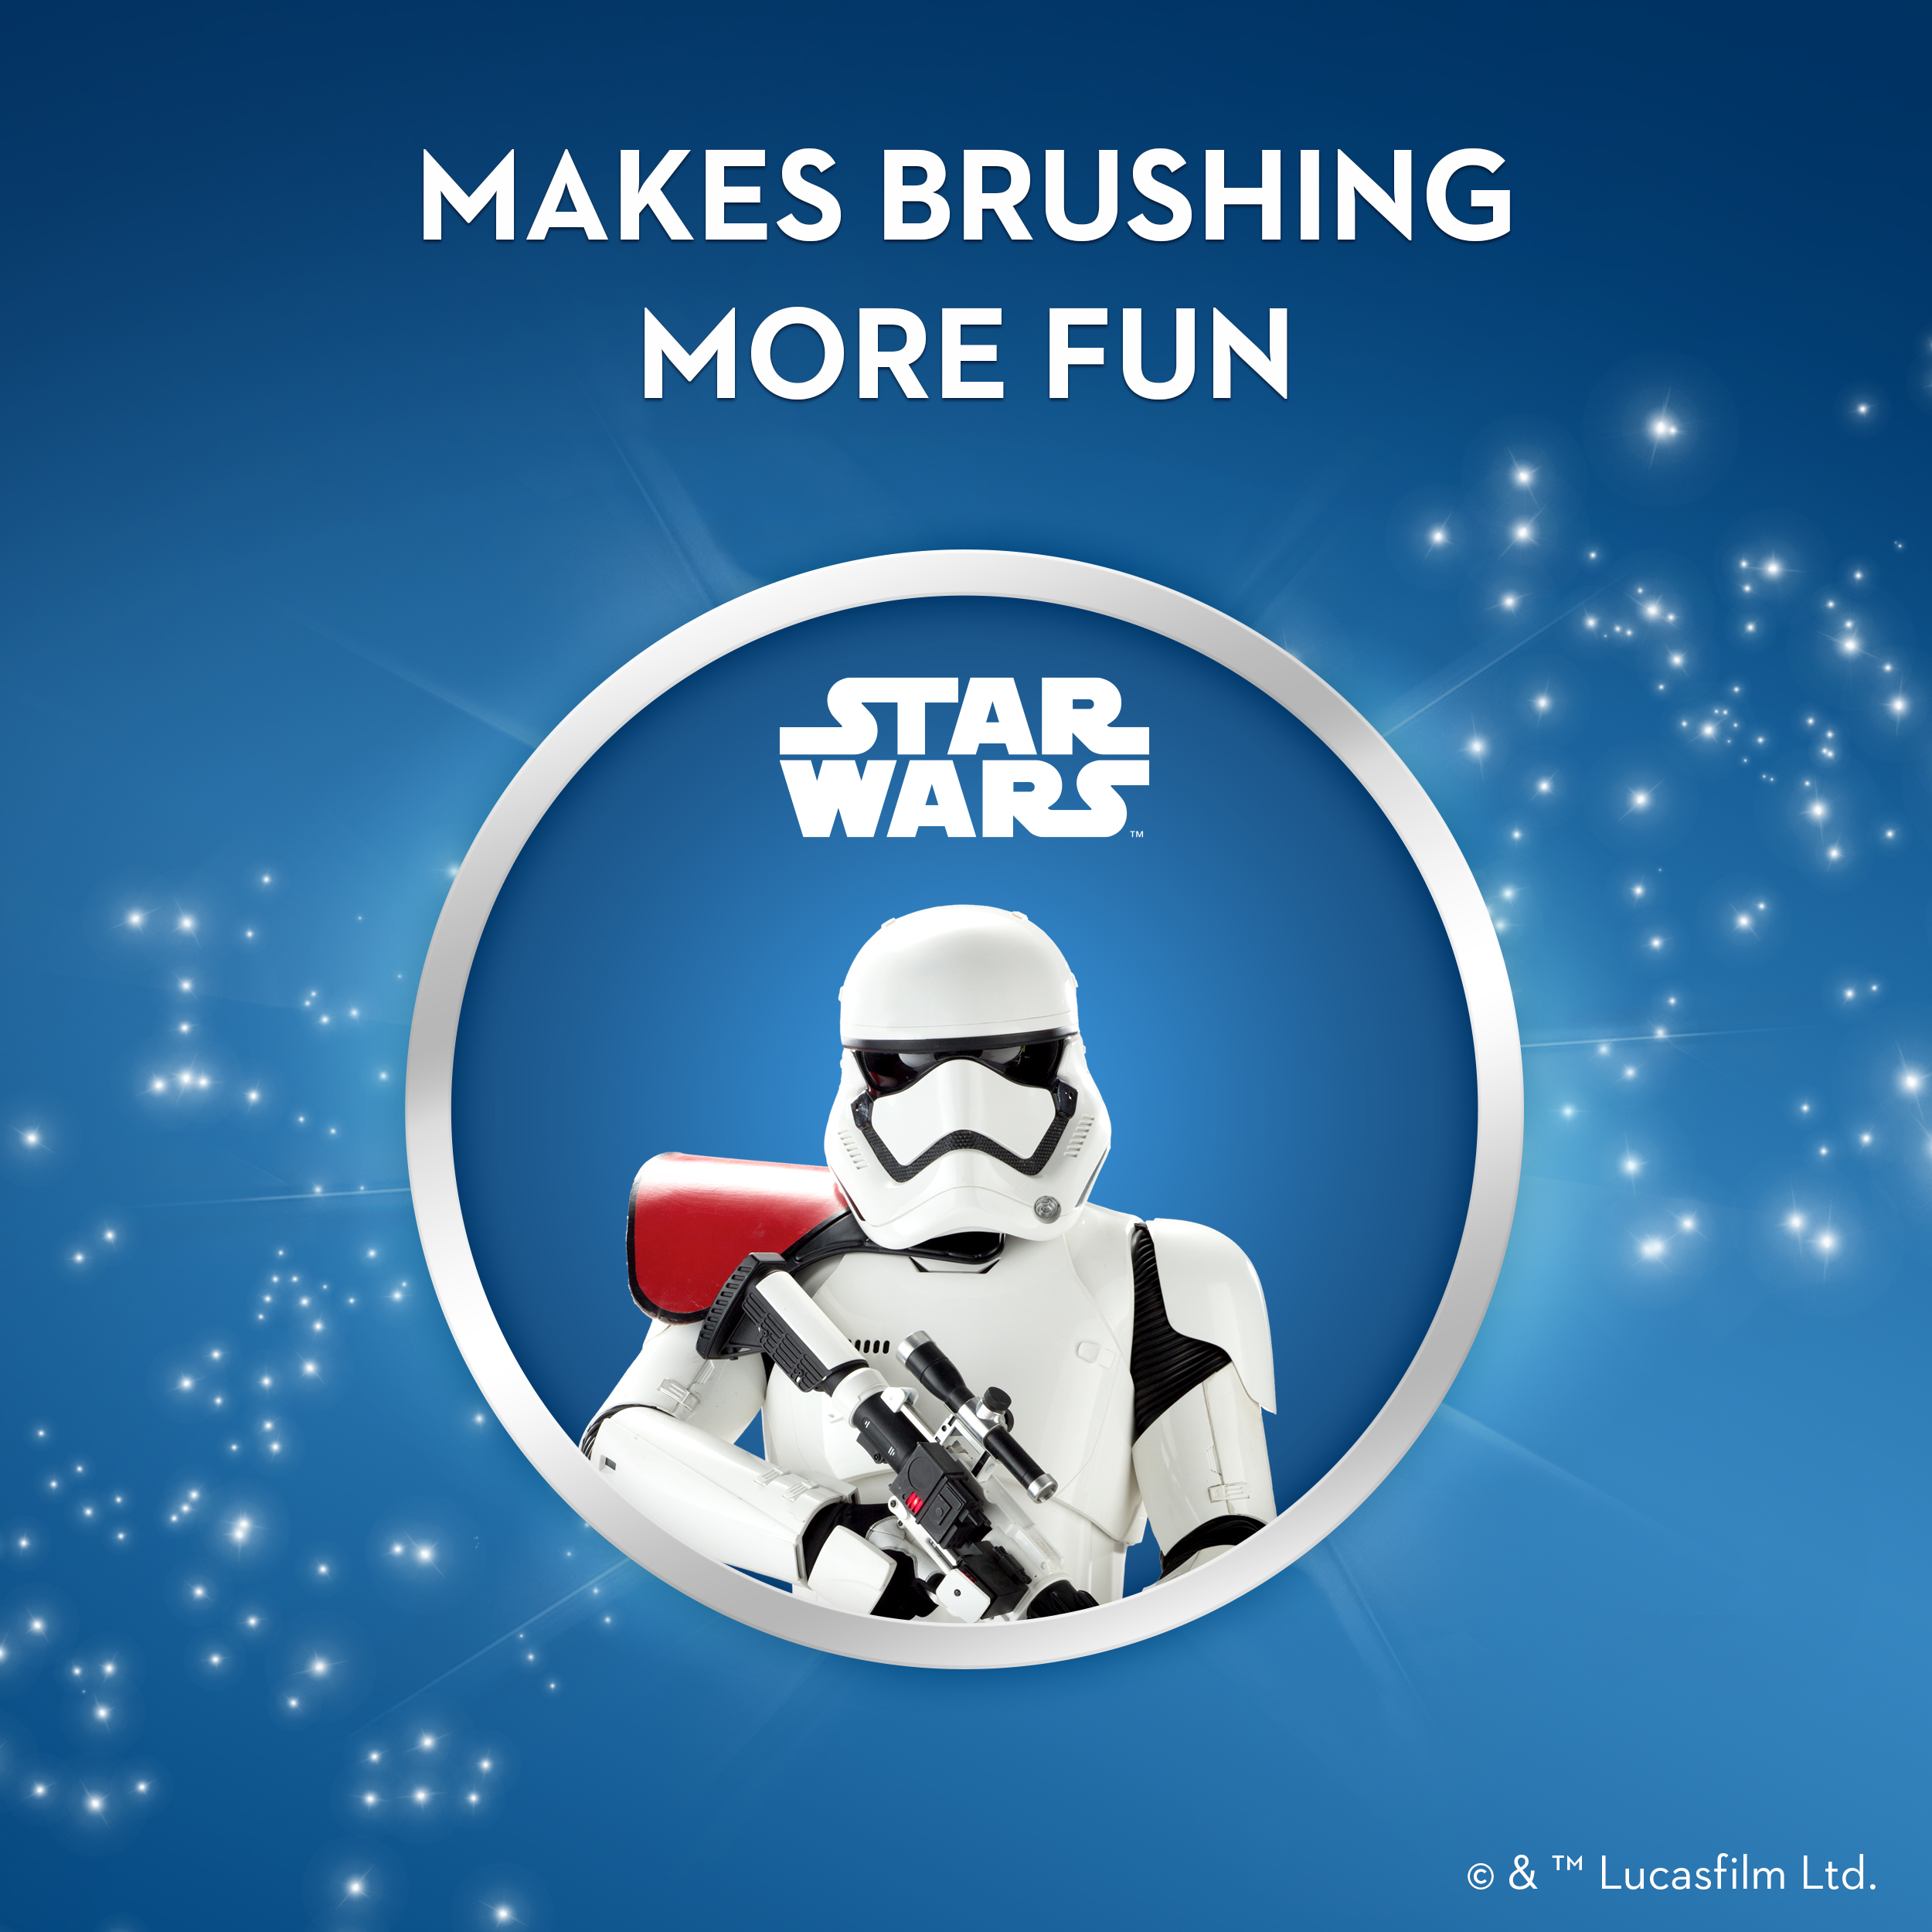 Crest & Oral-B Kids Star Wars Gift Pack with Power Toothbrush and Toothpaste, 4.2 Oz - image 4 of 10